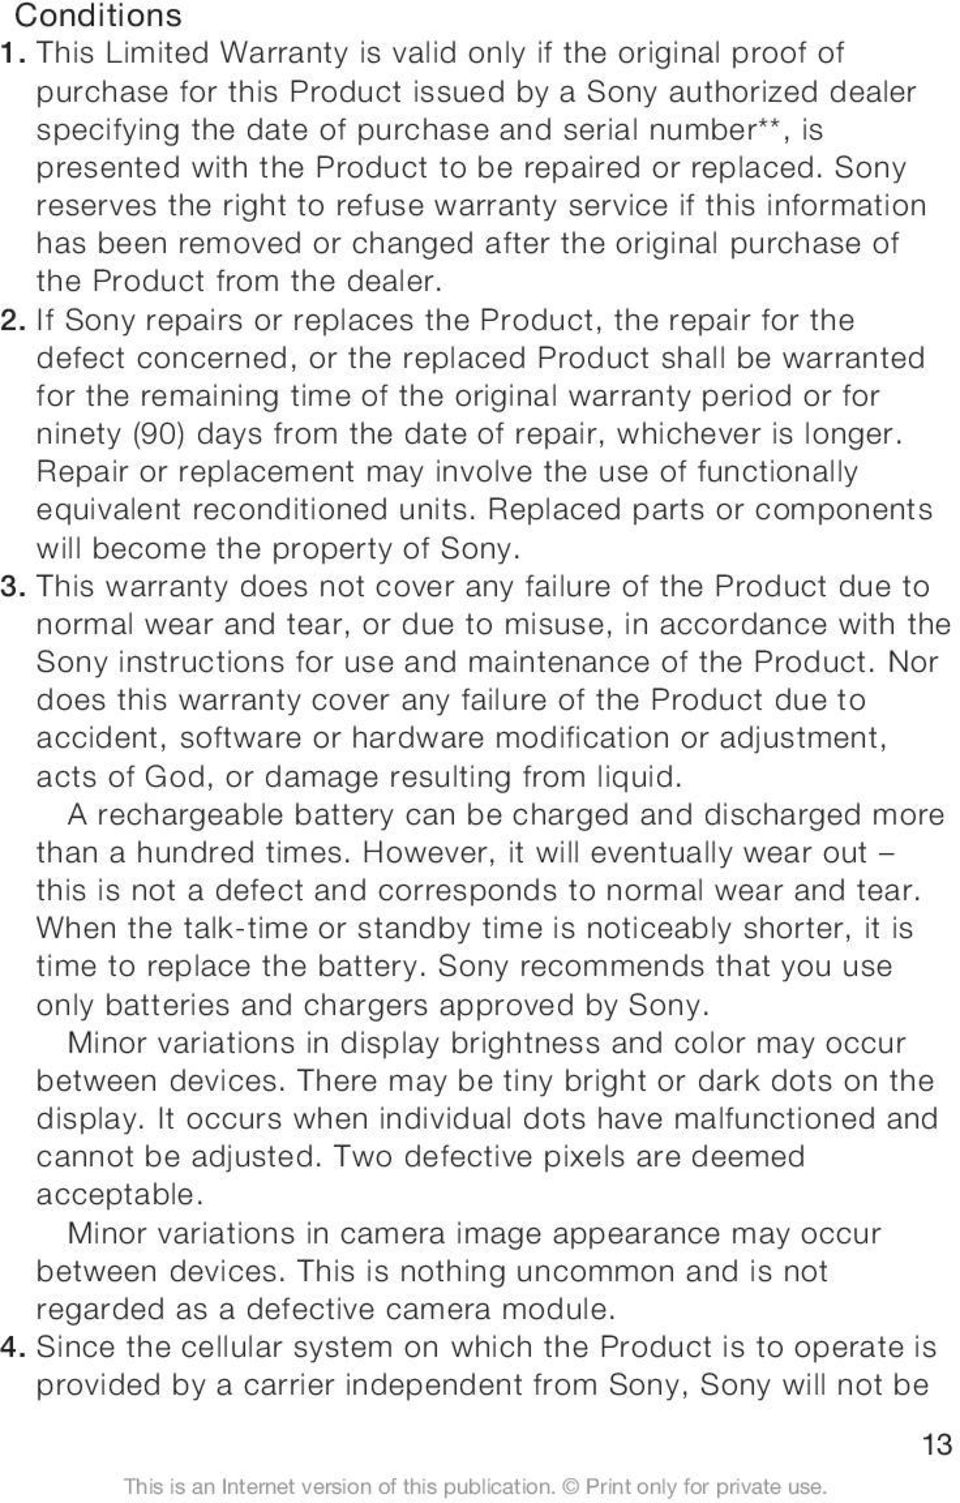 Product to be repaired or replaced. Sony reserves the right to refuse warranty service if this information has been removed or changed after the original purchase of the Product from the dealer. 2.